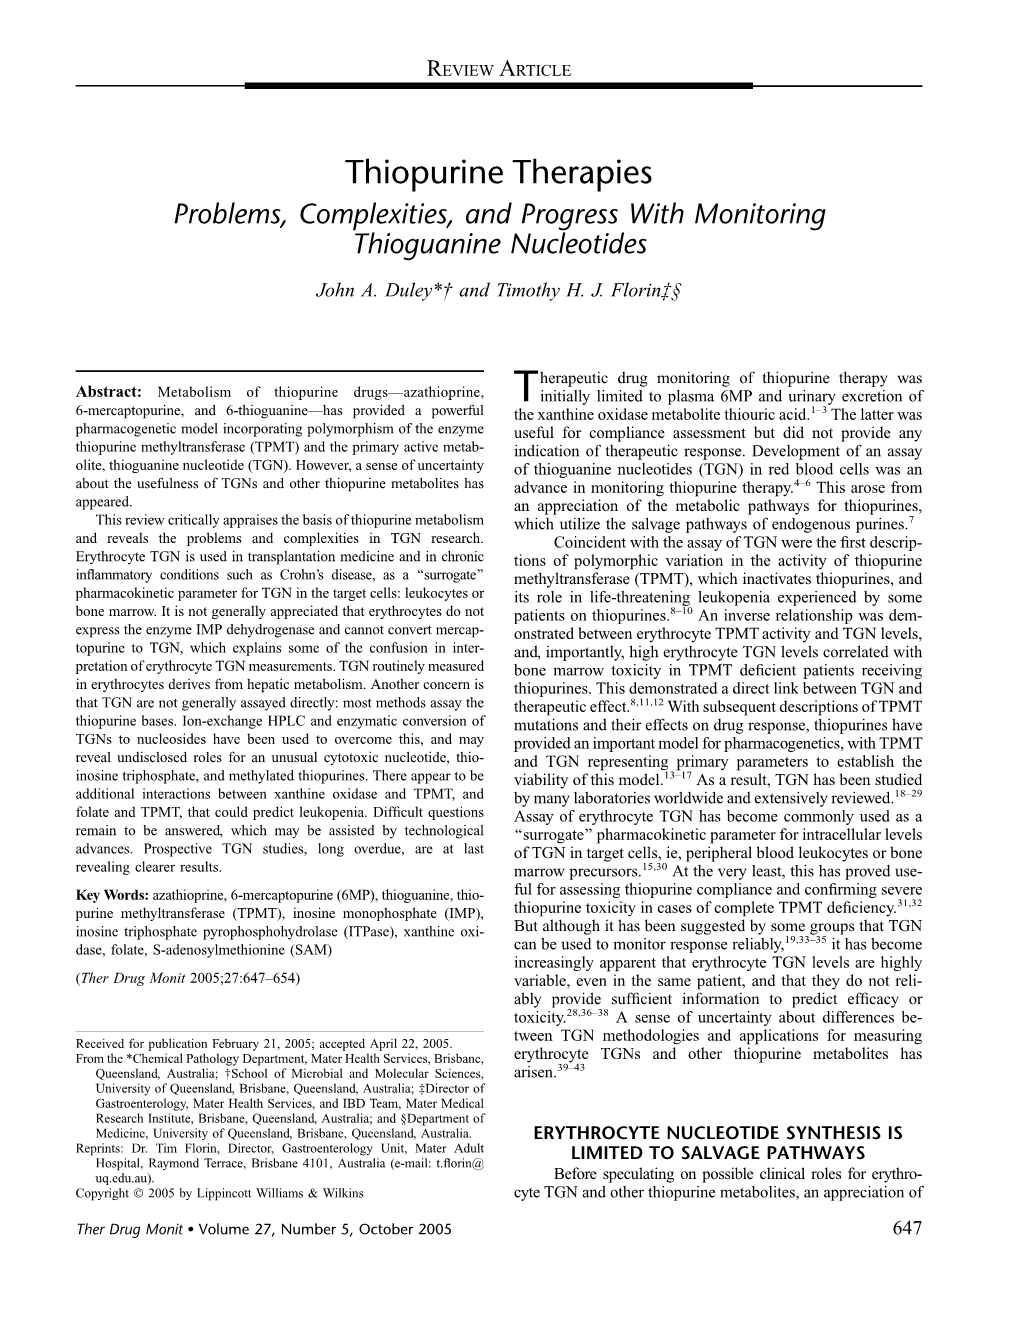 Thiopurine Therapies Problems, Complexities, and Progress with Monitoring Thioguanine Nucleotides